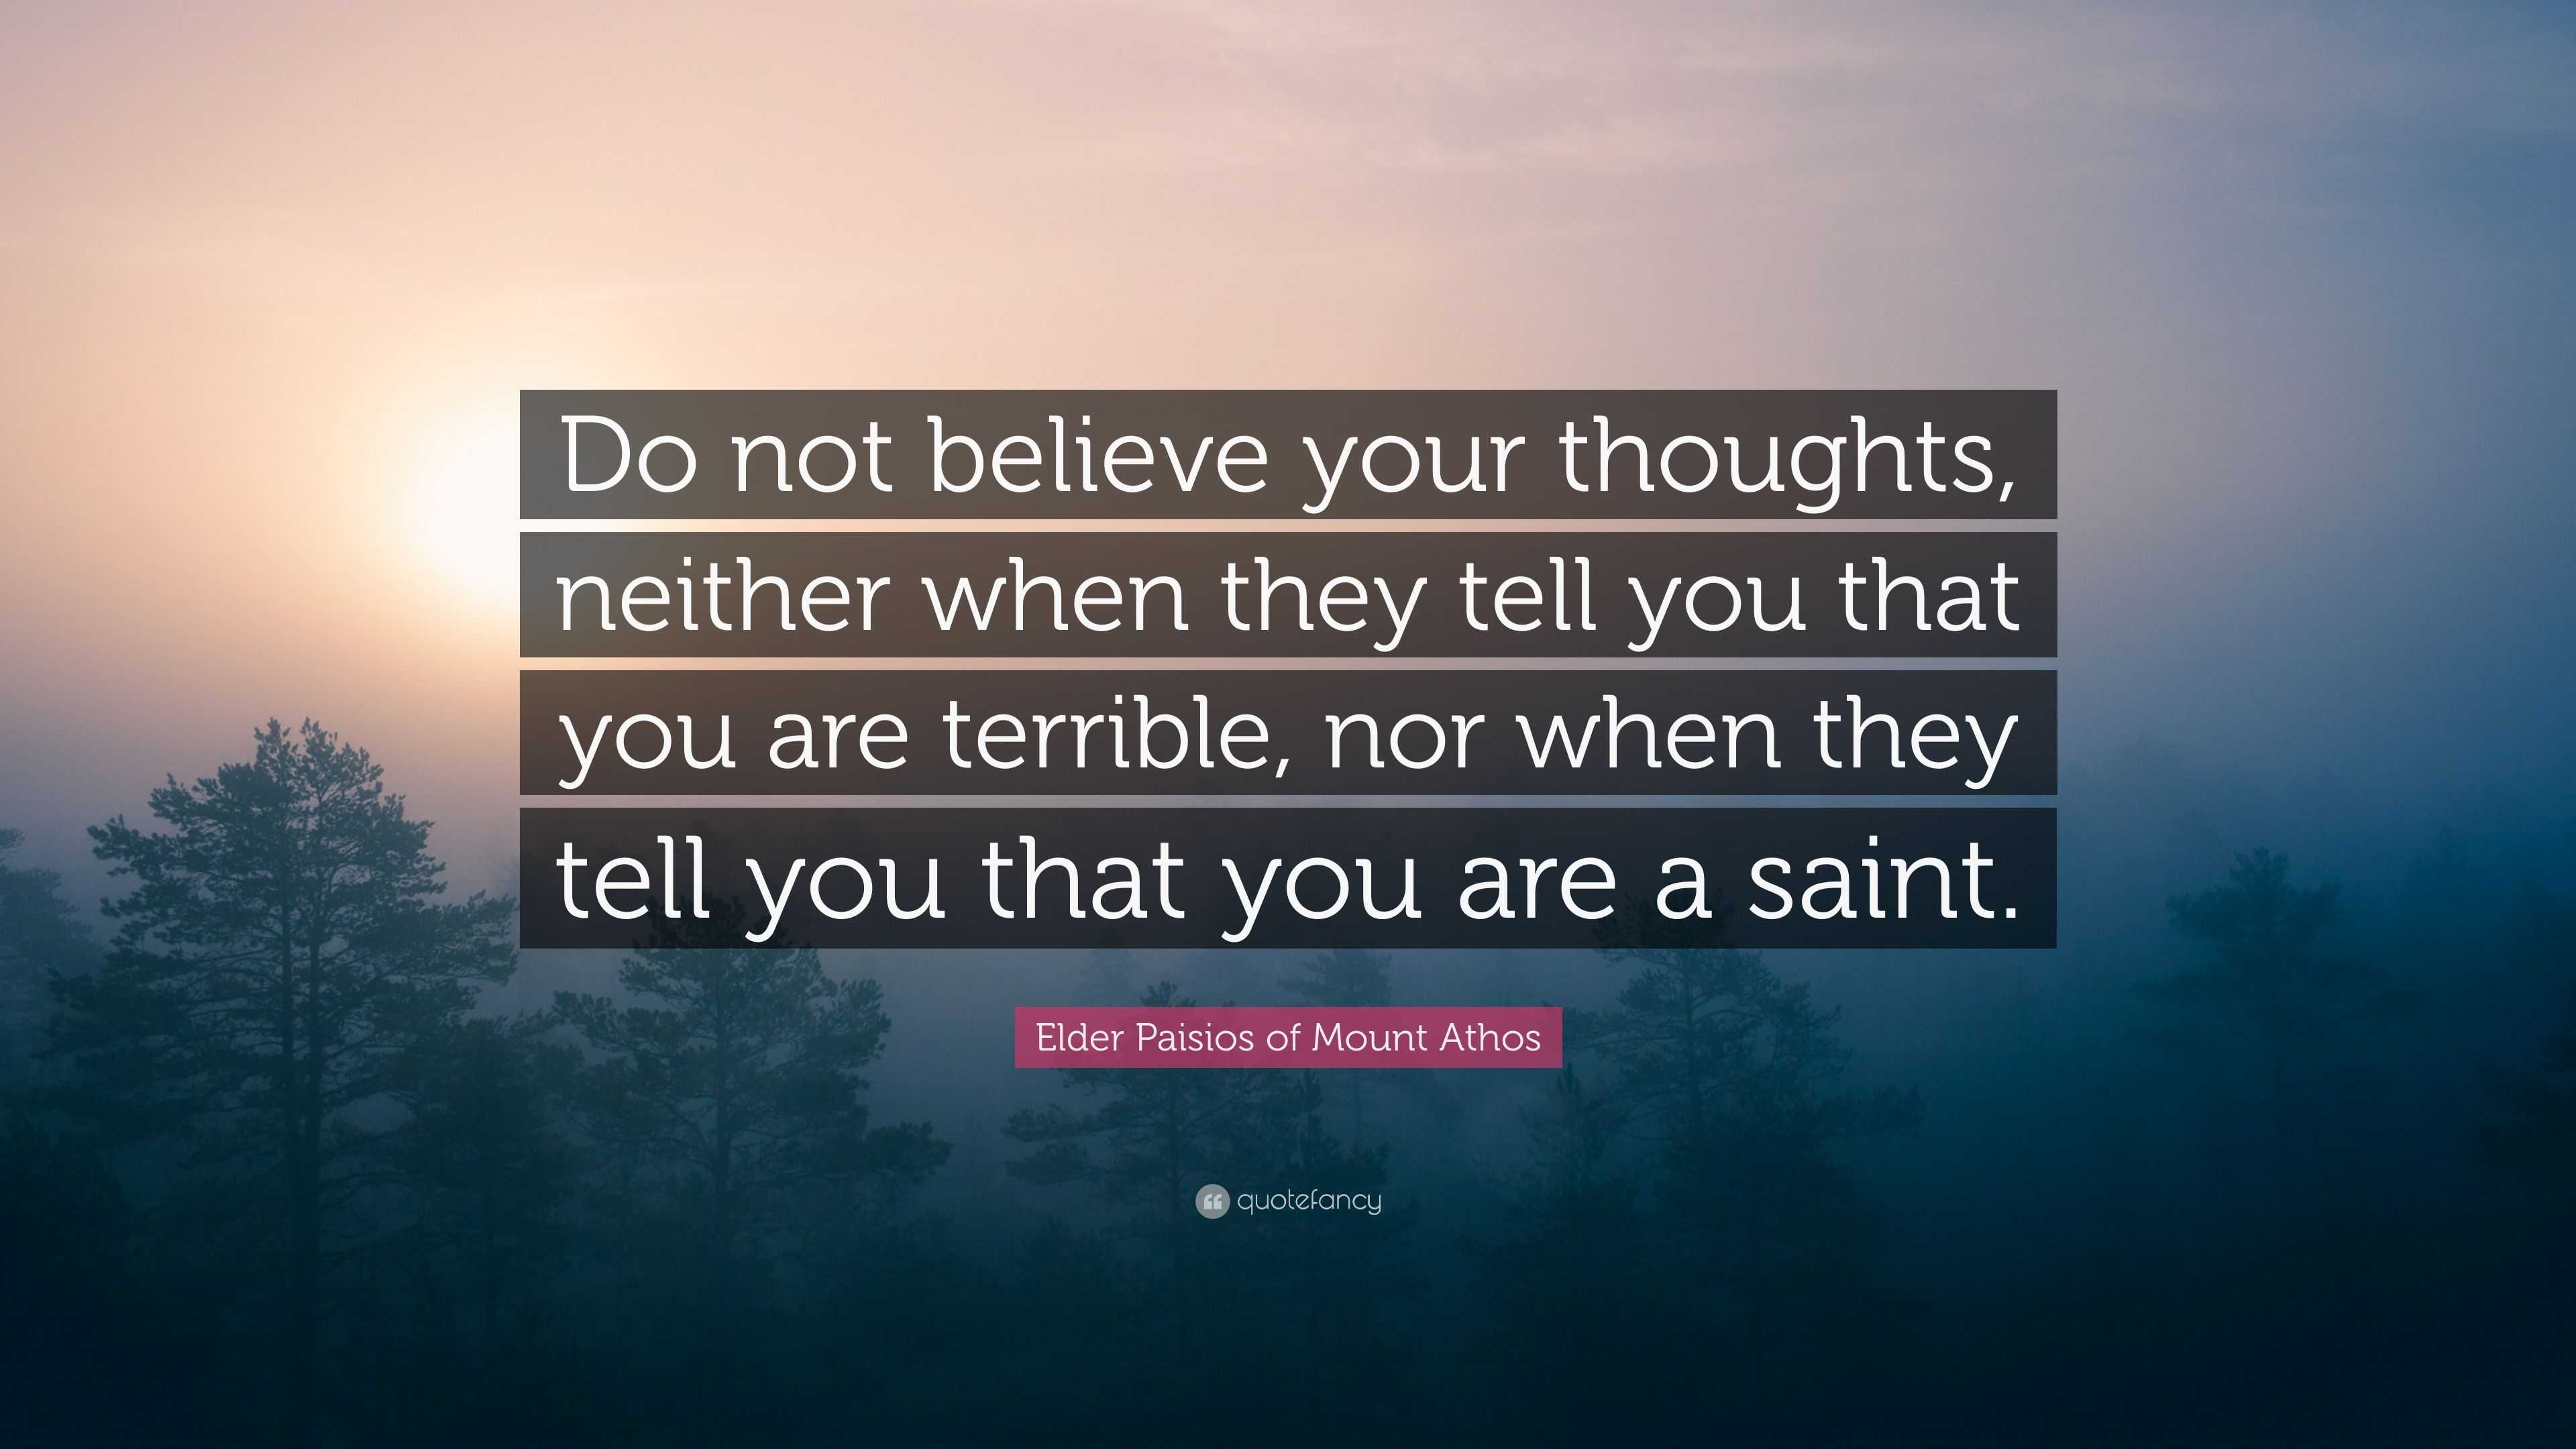 Elder Paisios of Mount Athos Quote: “Do not believe your thoughts ...